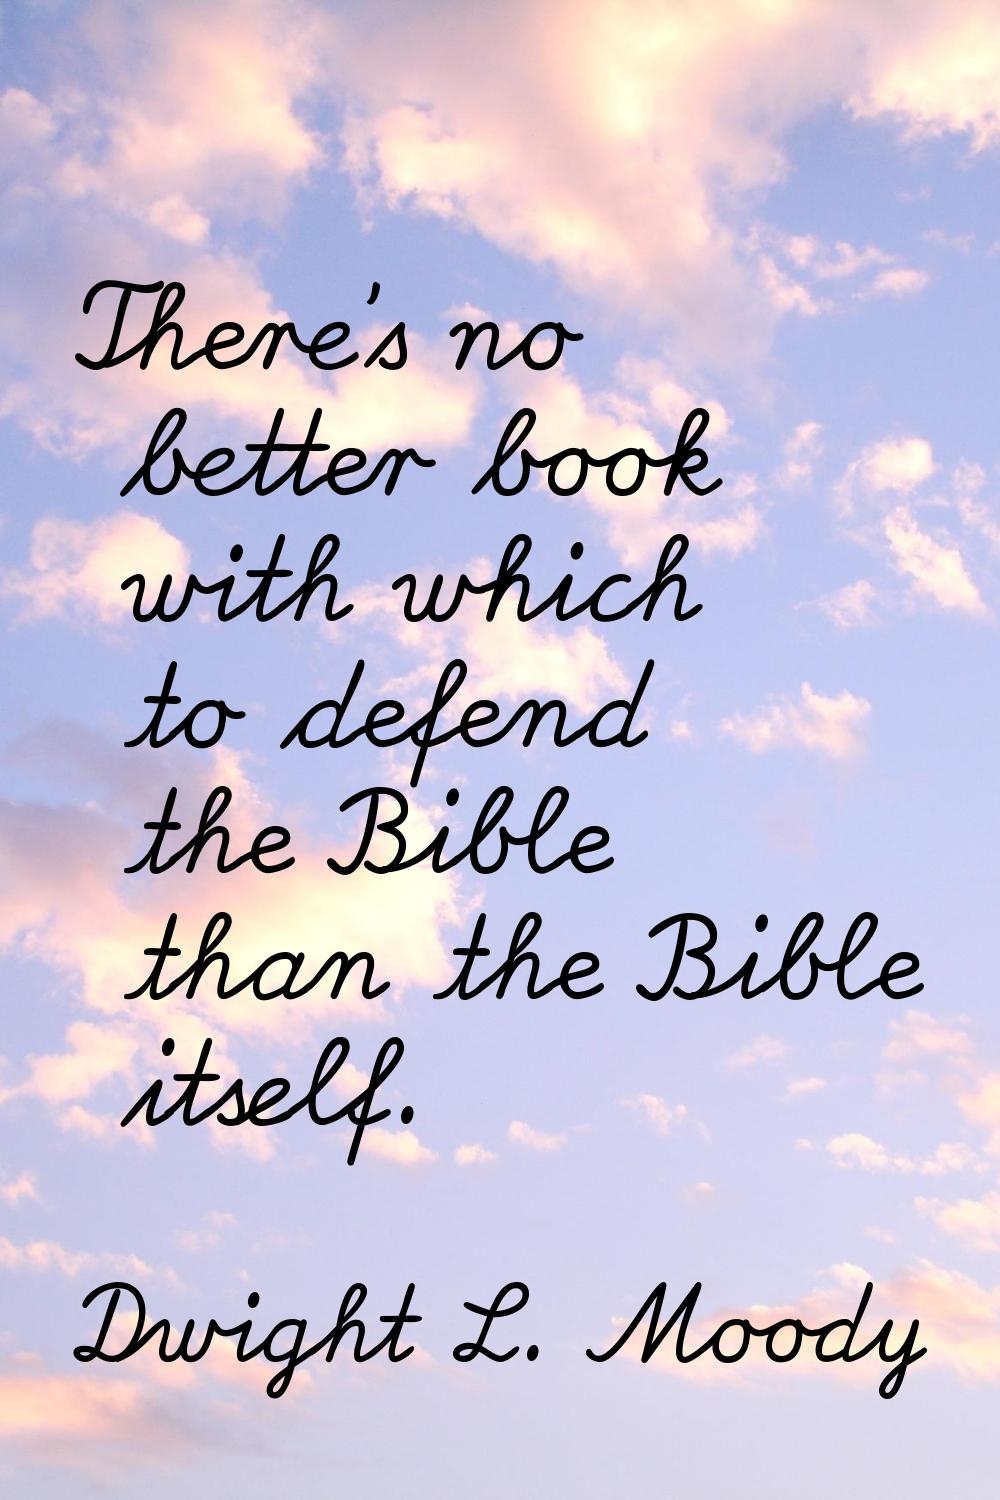 There's no better book with which to defend the Bible than the Bible itself.